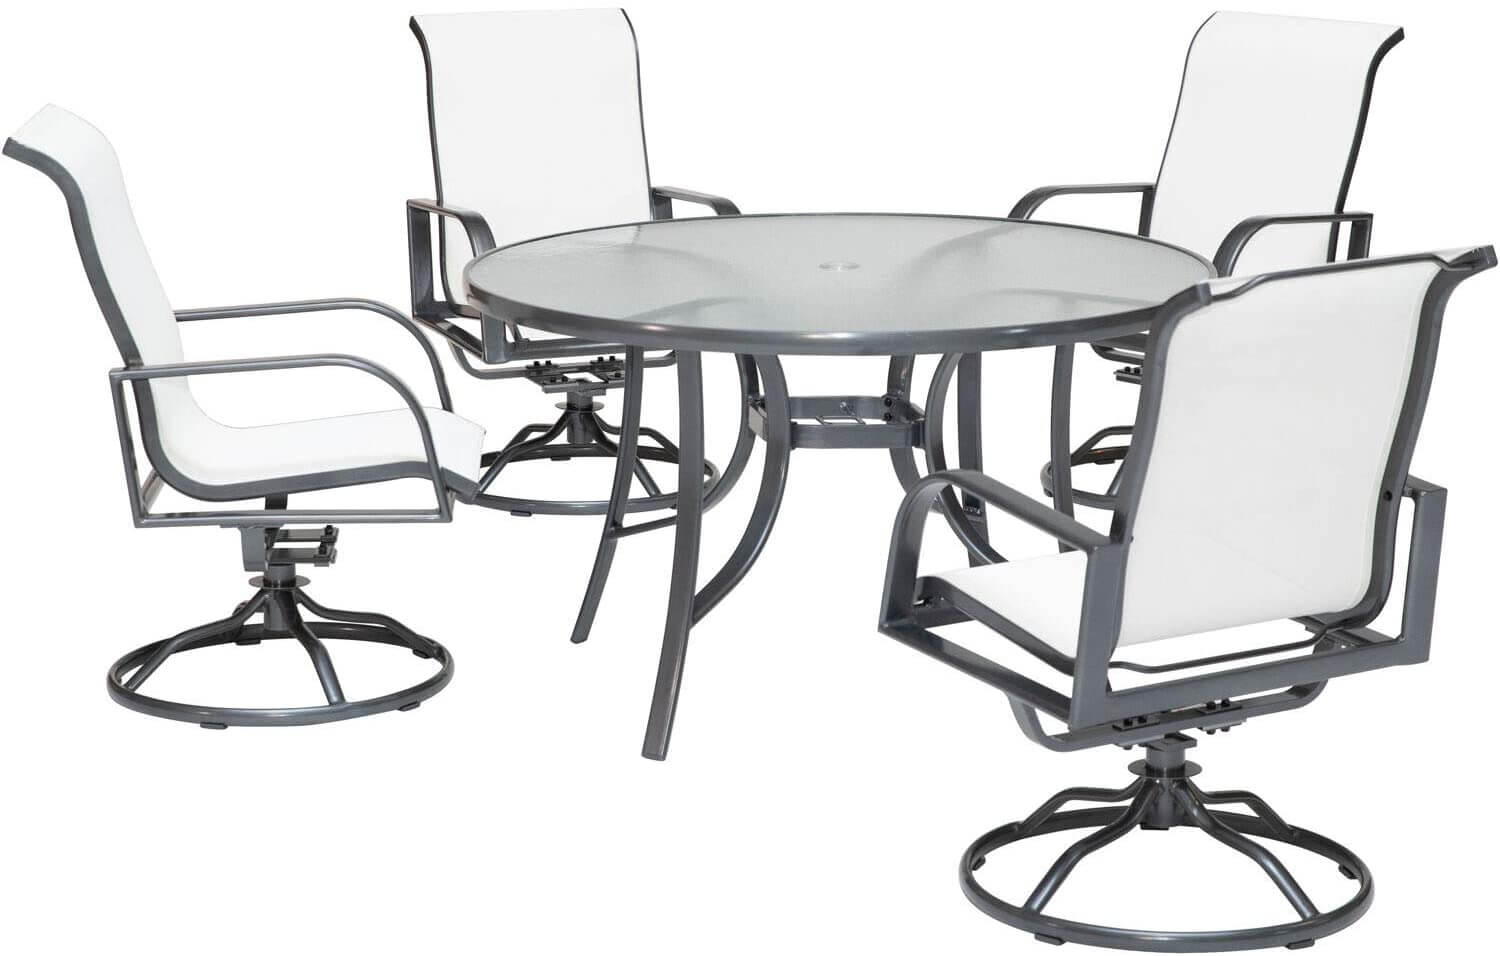 patio chairs and table available for sale. click image to learn more or buy now.